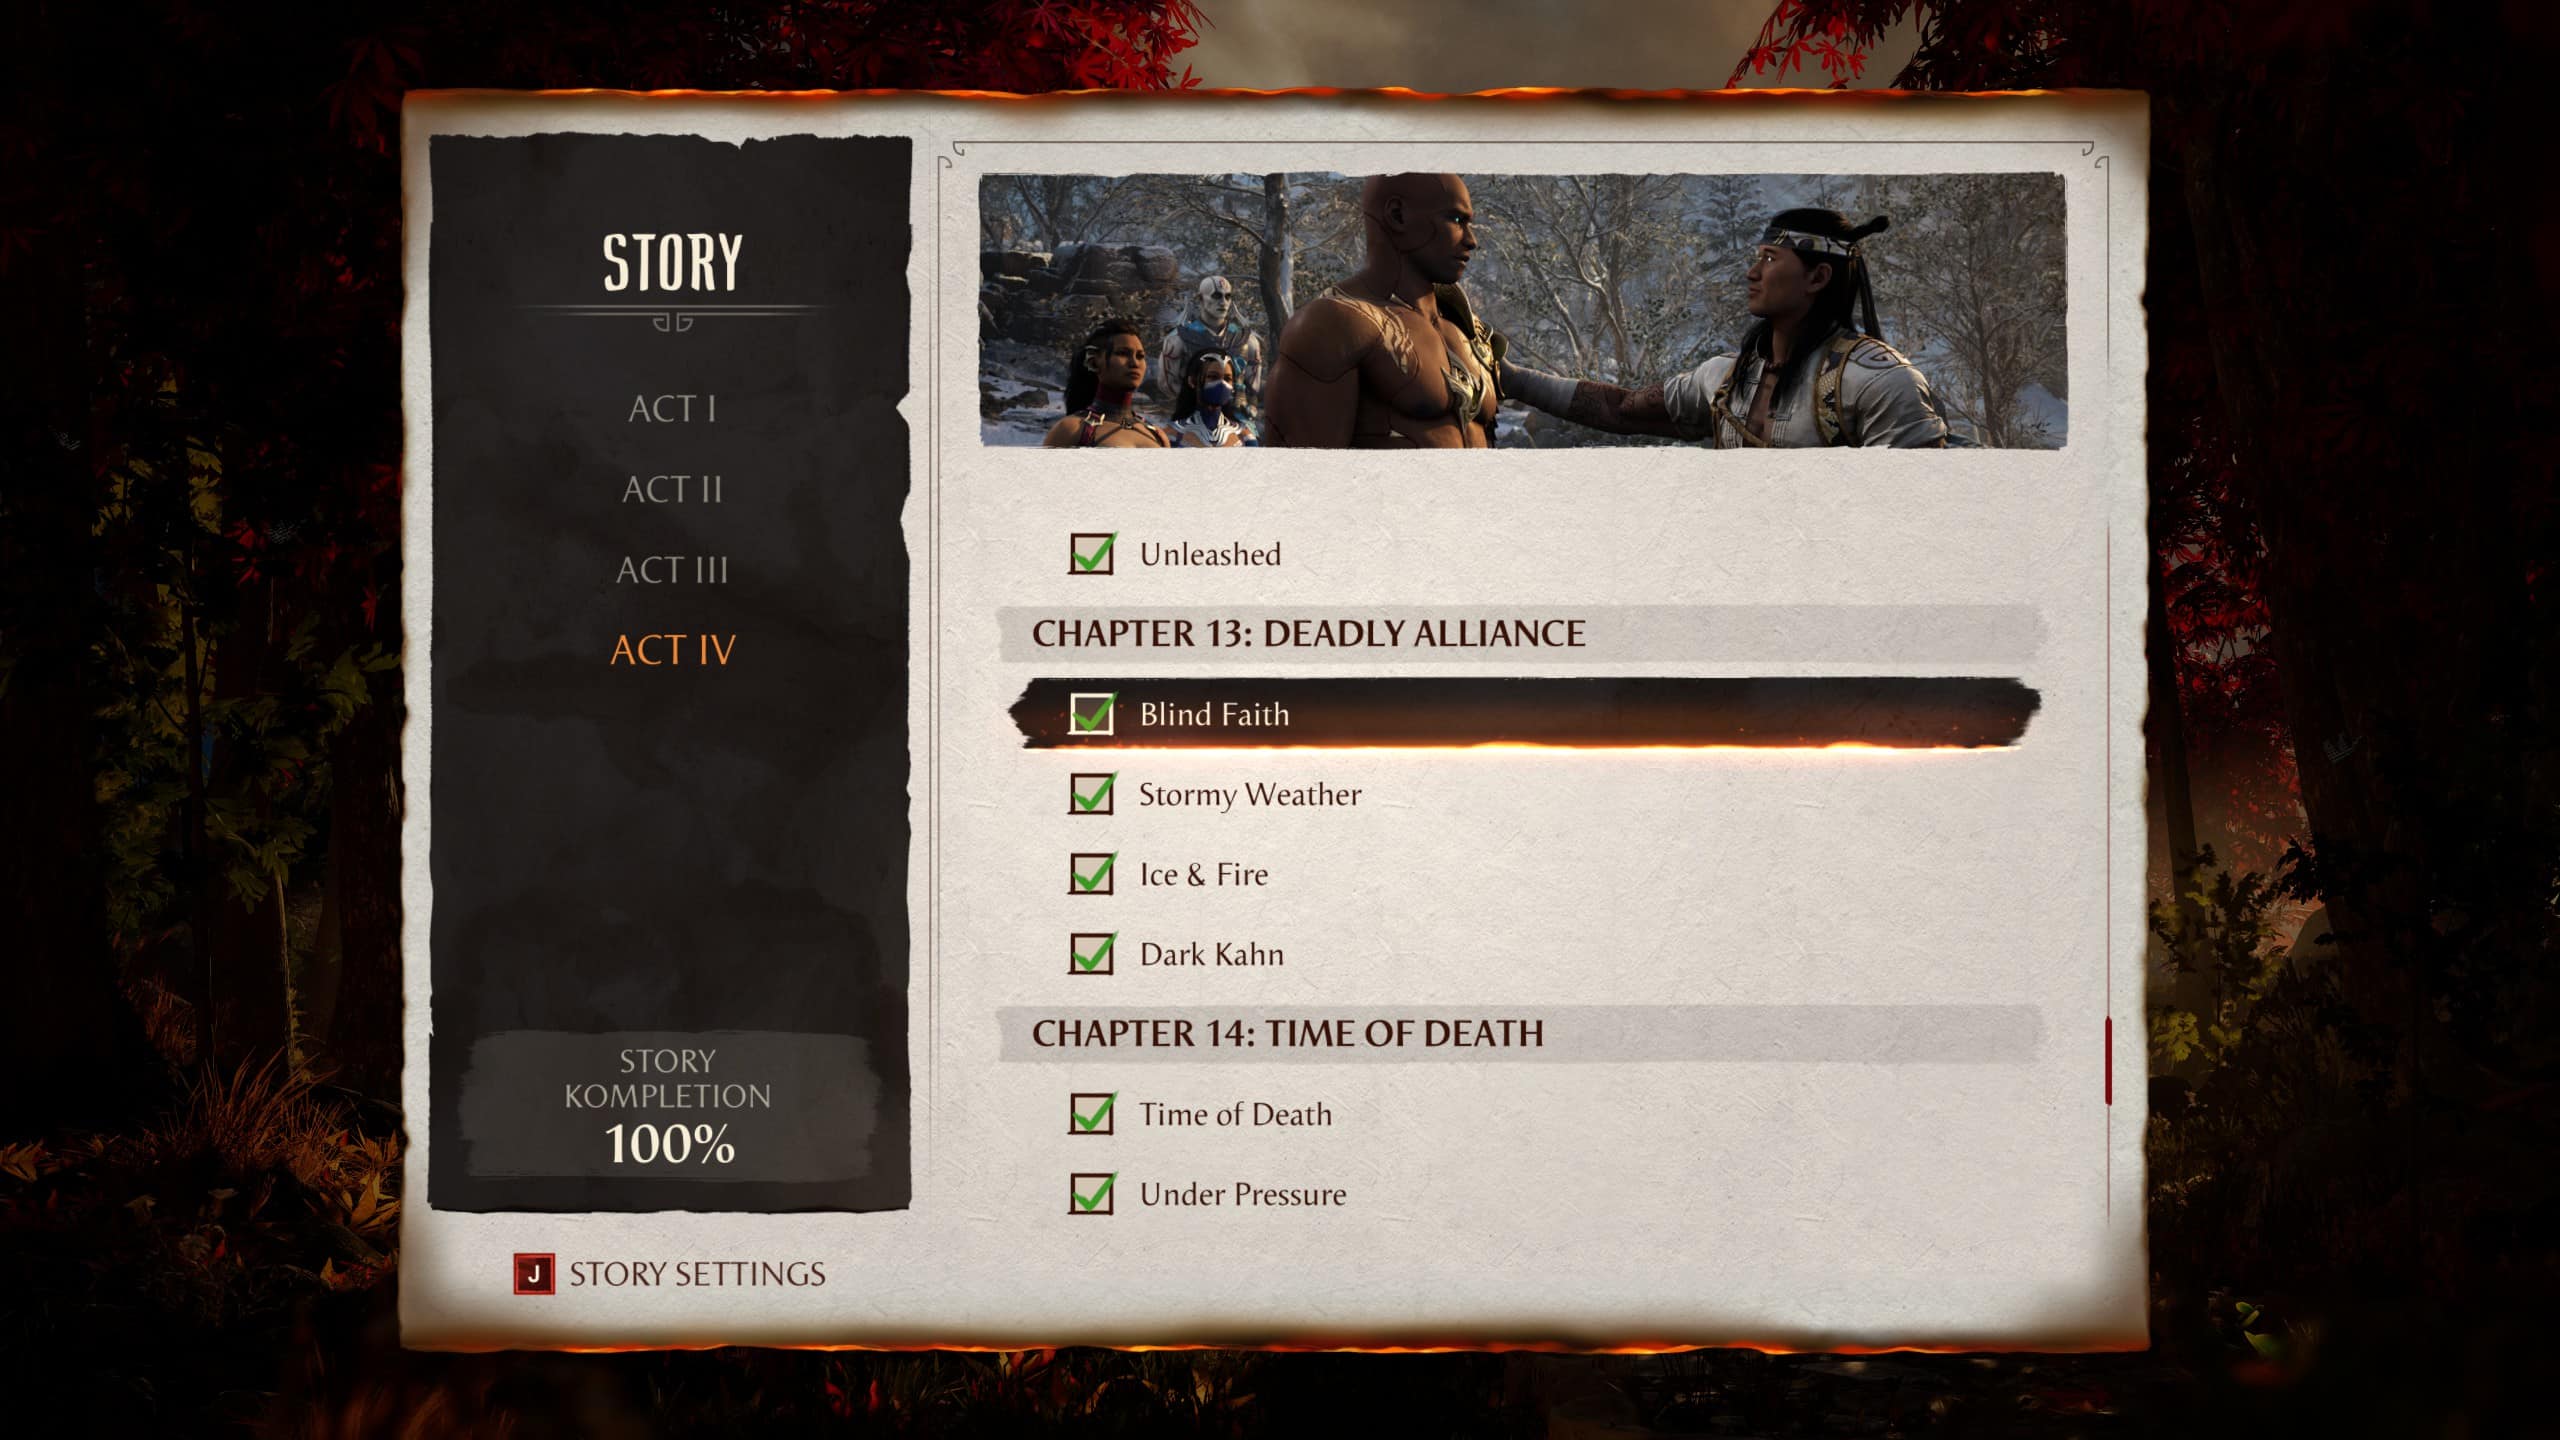 Mortal Kombat 1 chapters: An image of the in-game campaign menu with the fourth act highlighted.